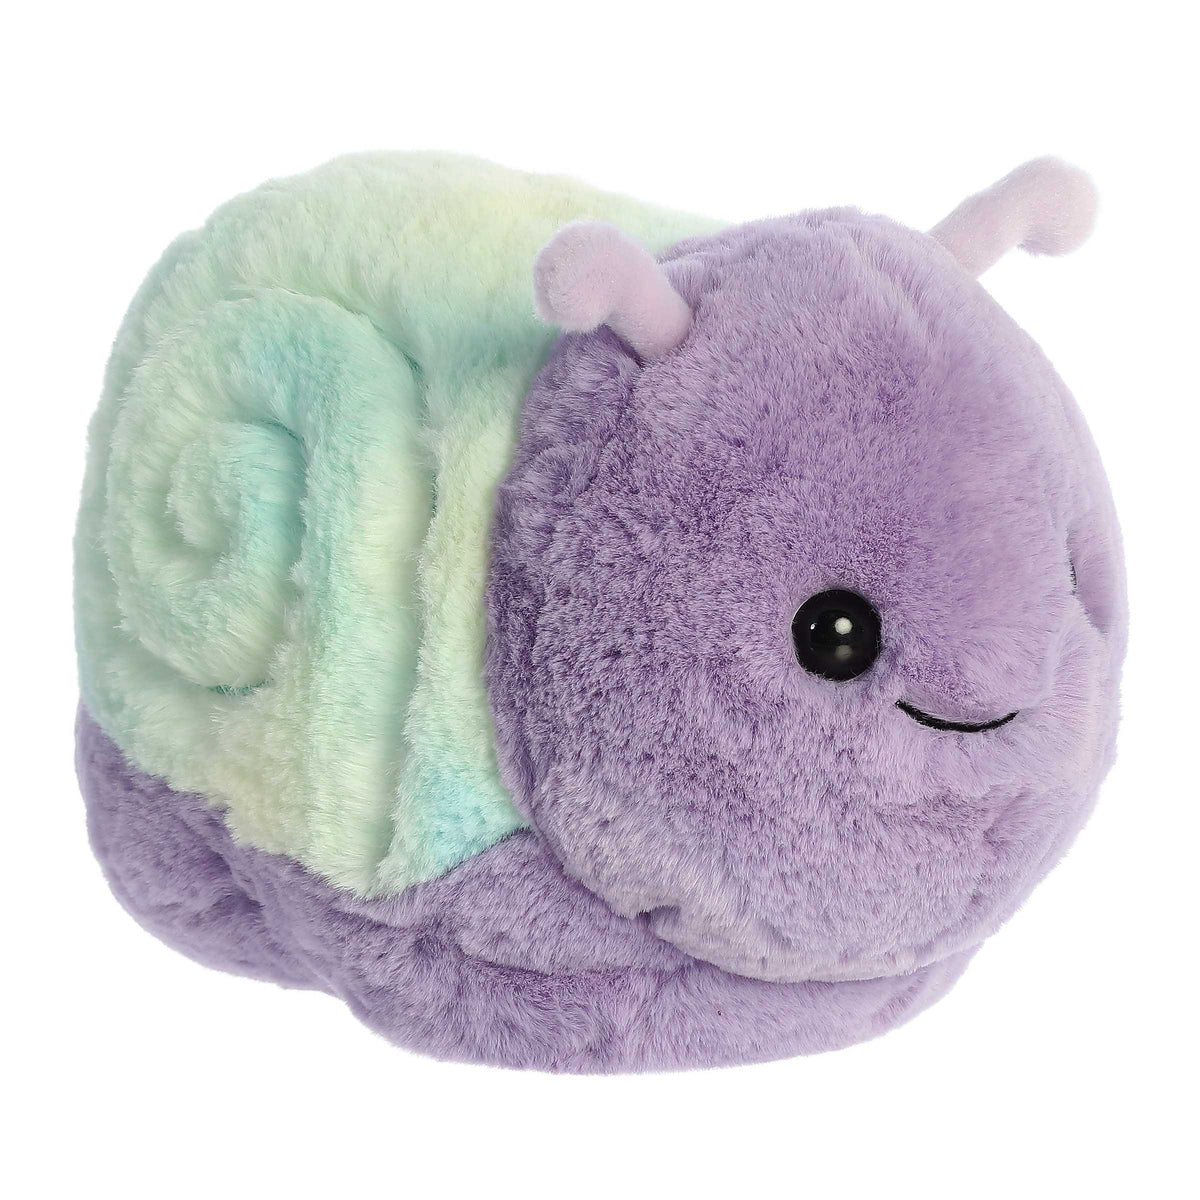 Meet our unique Snail plush - a cozy potato-shaped addition to the Spudsters family. It's where adorable meets comfort.